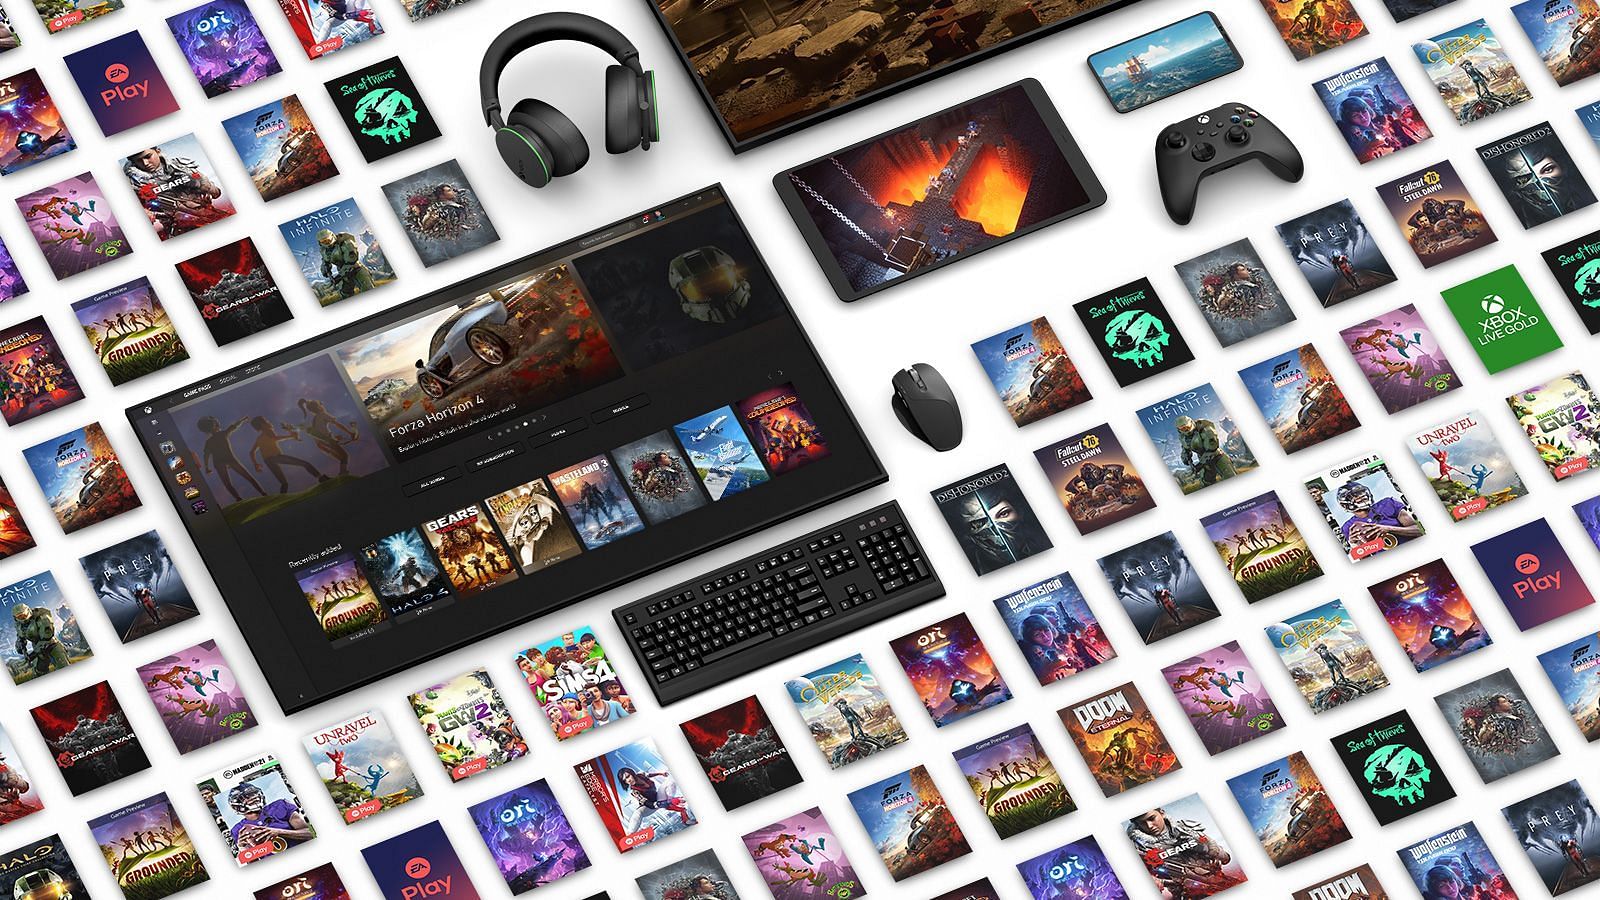 Xbox Game Pass has expanded into a massive service with hundreds of new games today. (Image via Xbox)